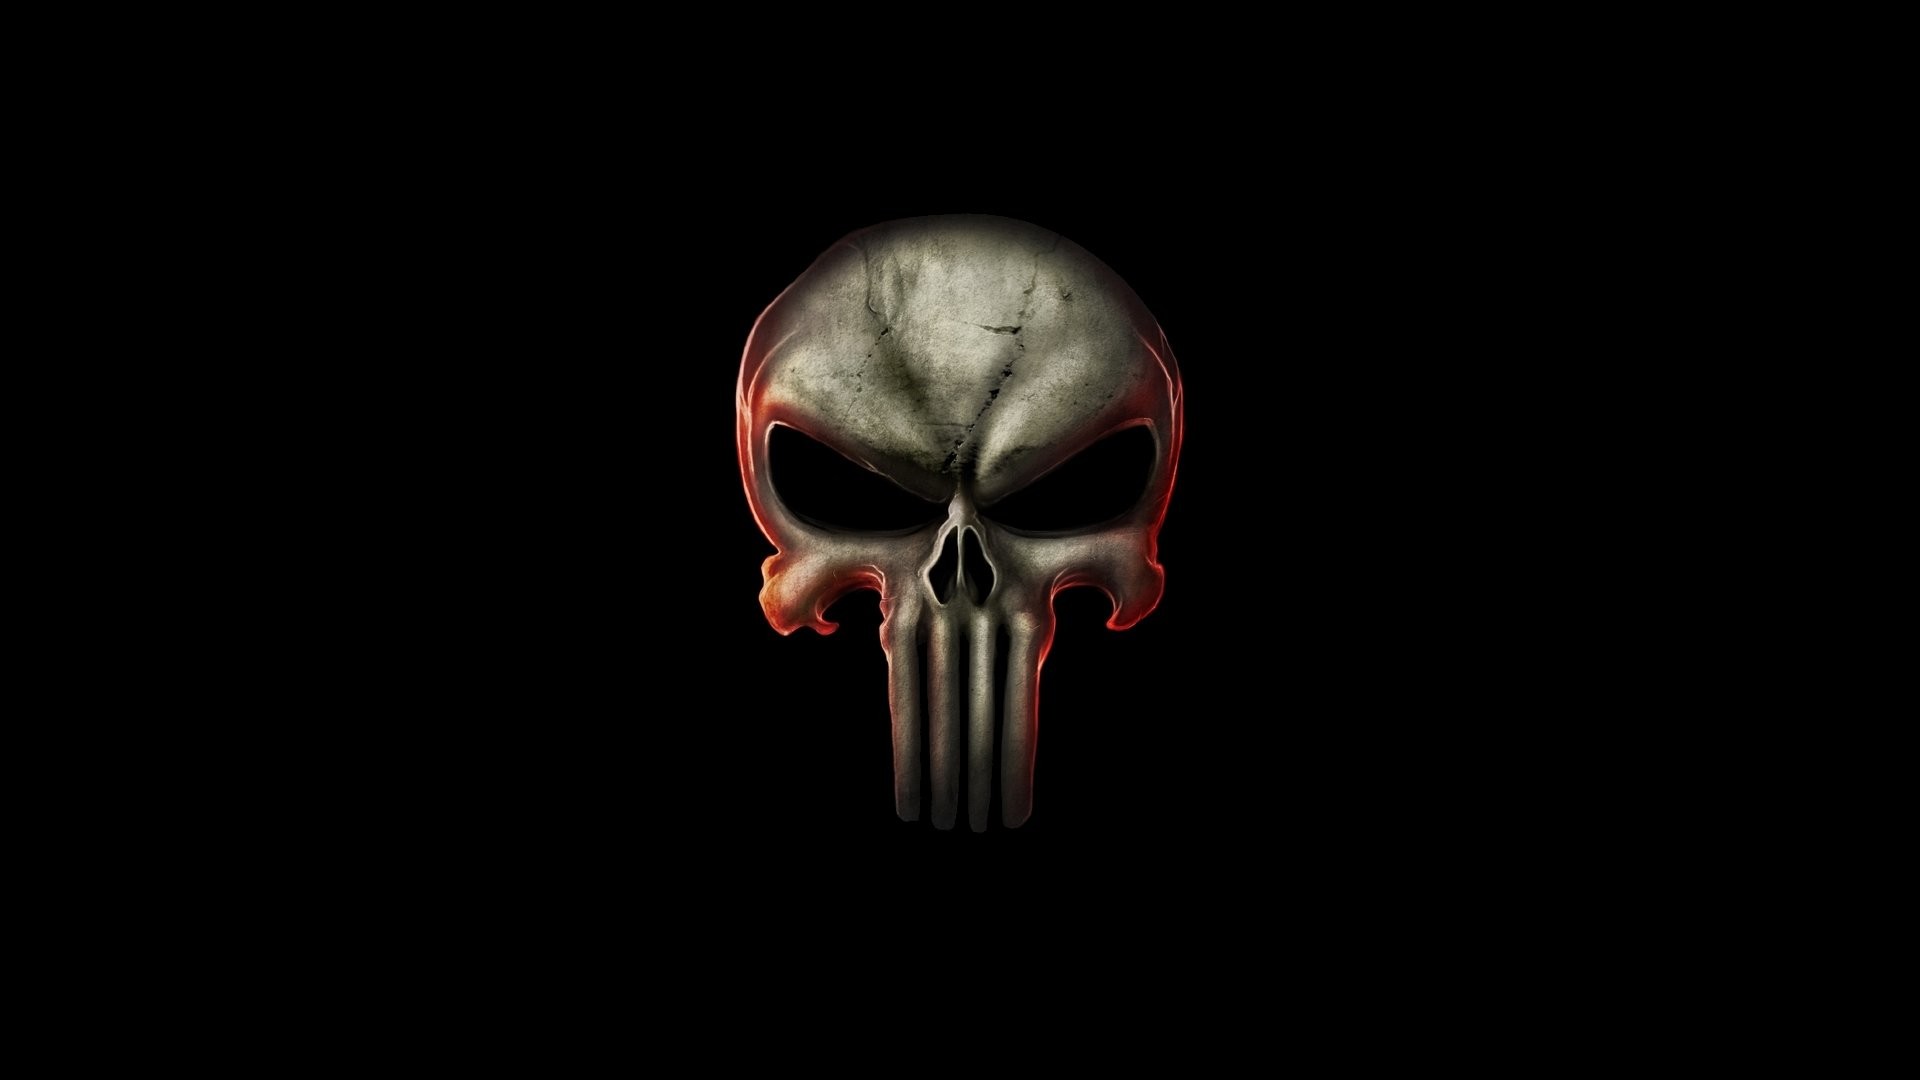 The Punisher Wallpapers Desktop K HD Backgrounds Fungyung